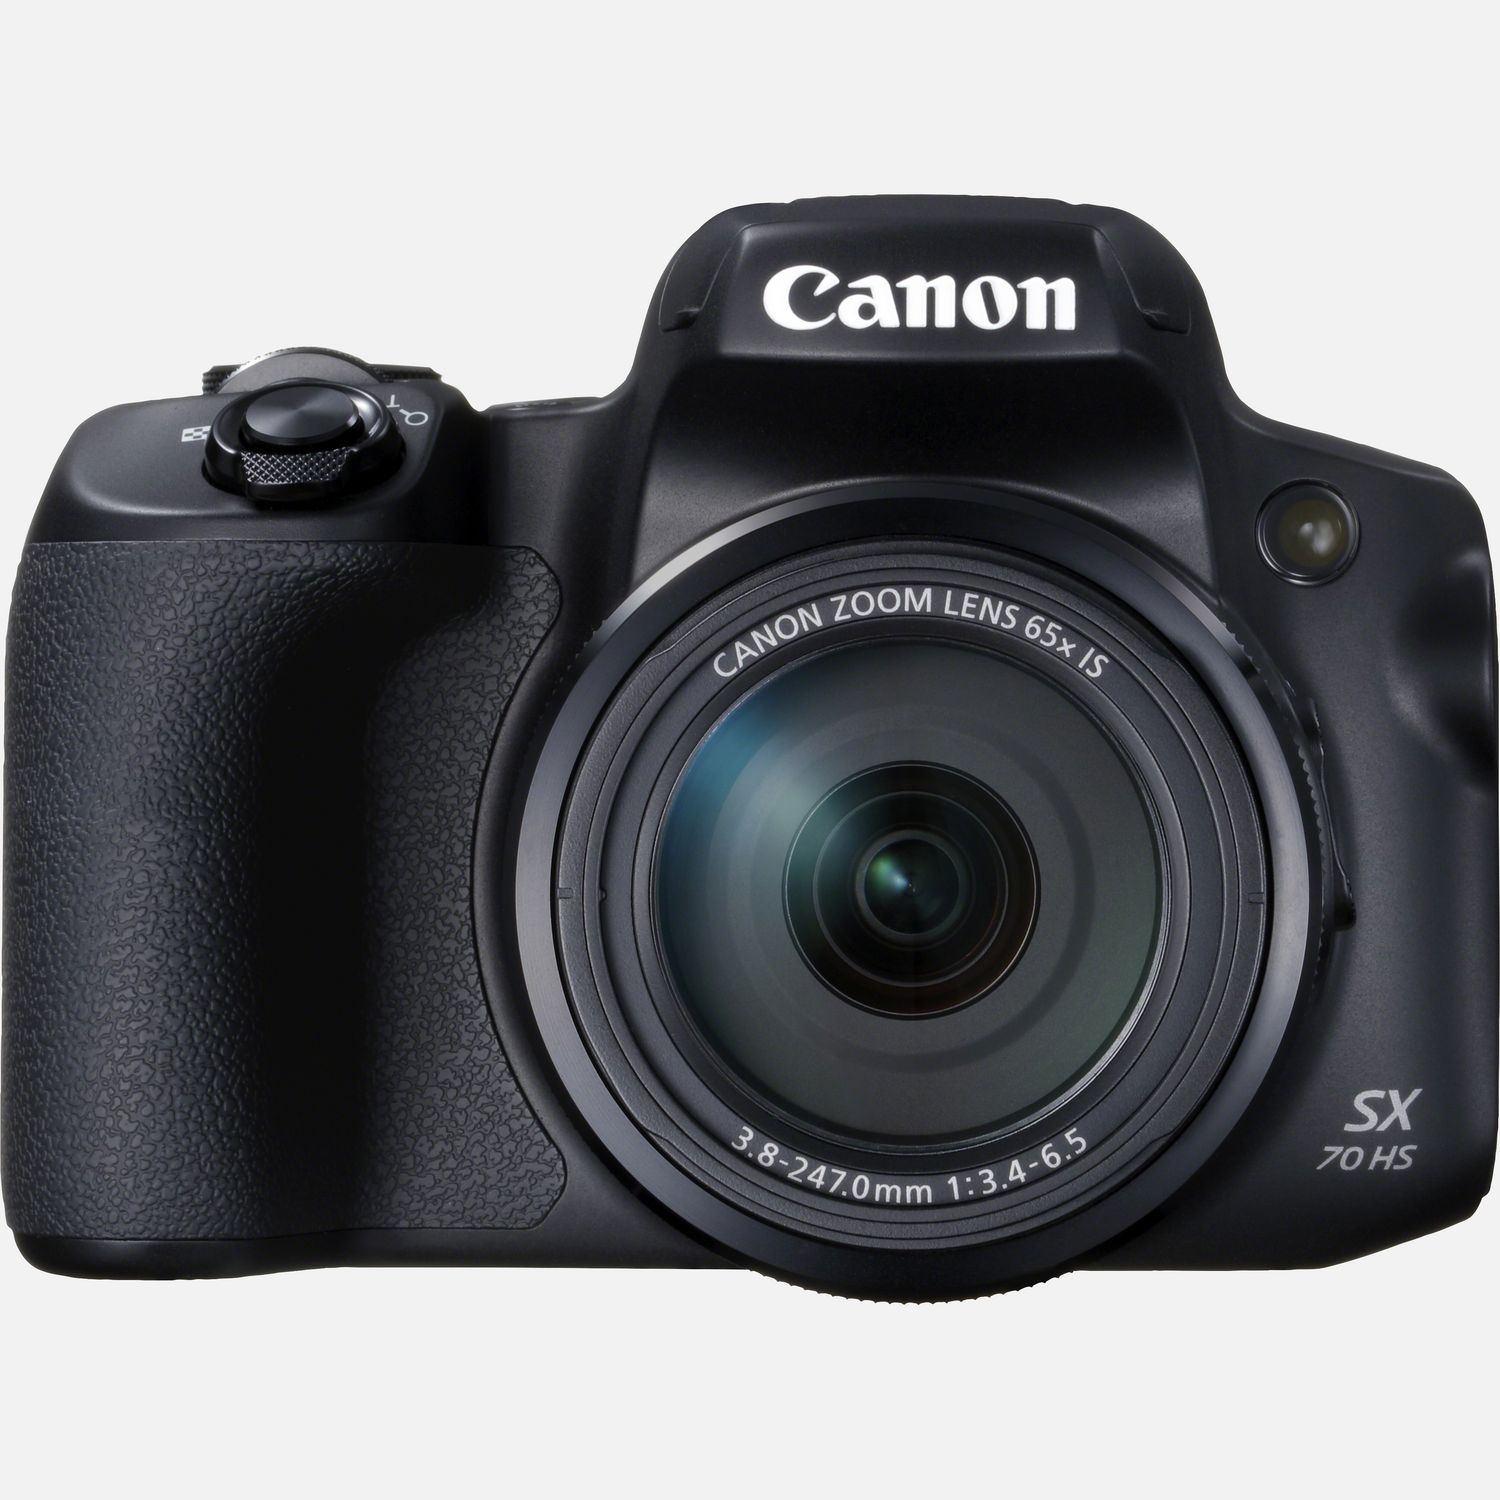 Canon PowerShot SX70 HS Camera in Wi-Fi Cameras at Canon